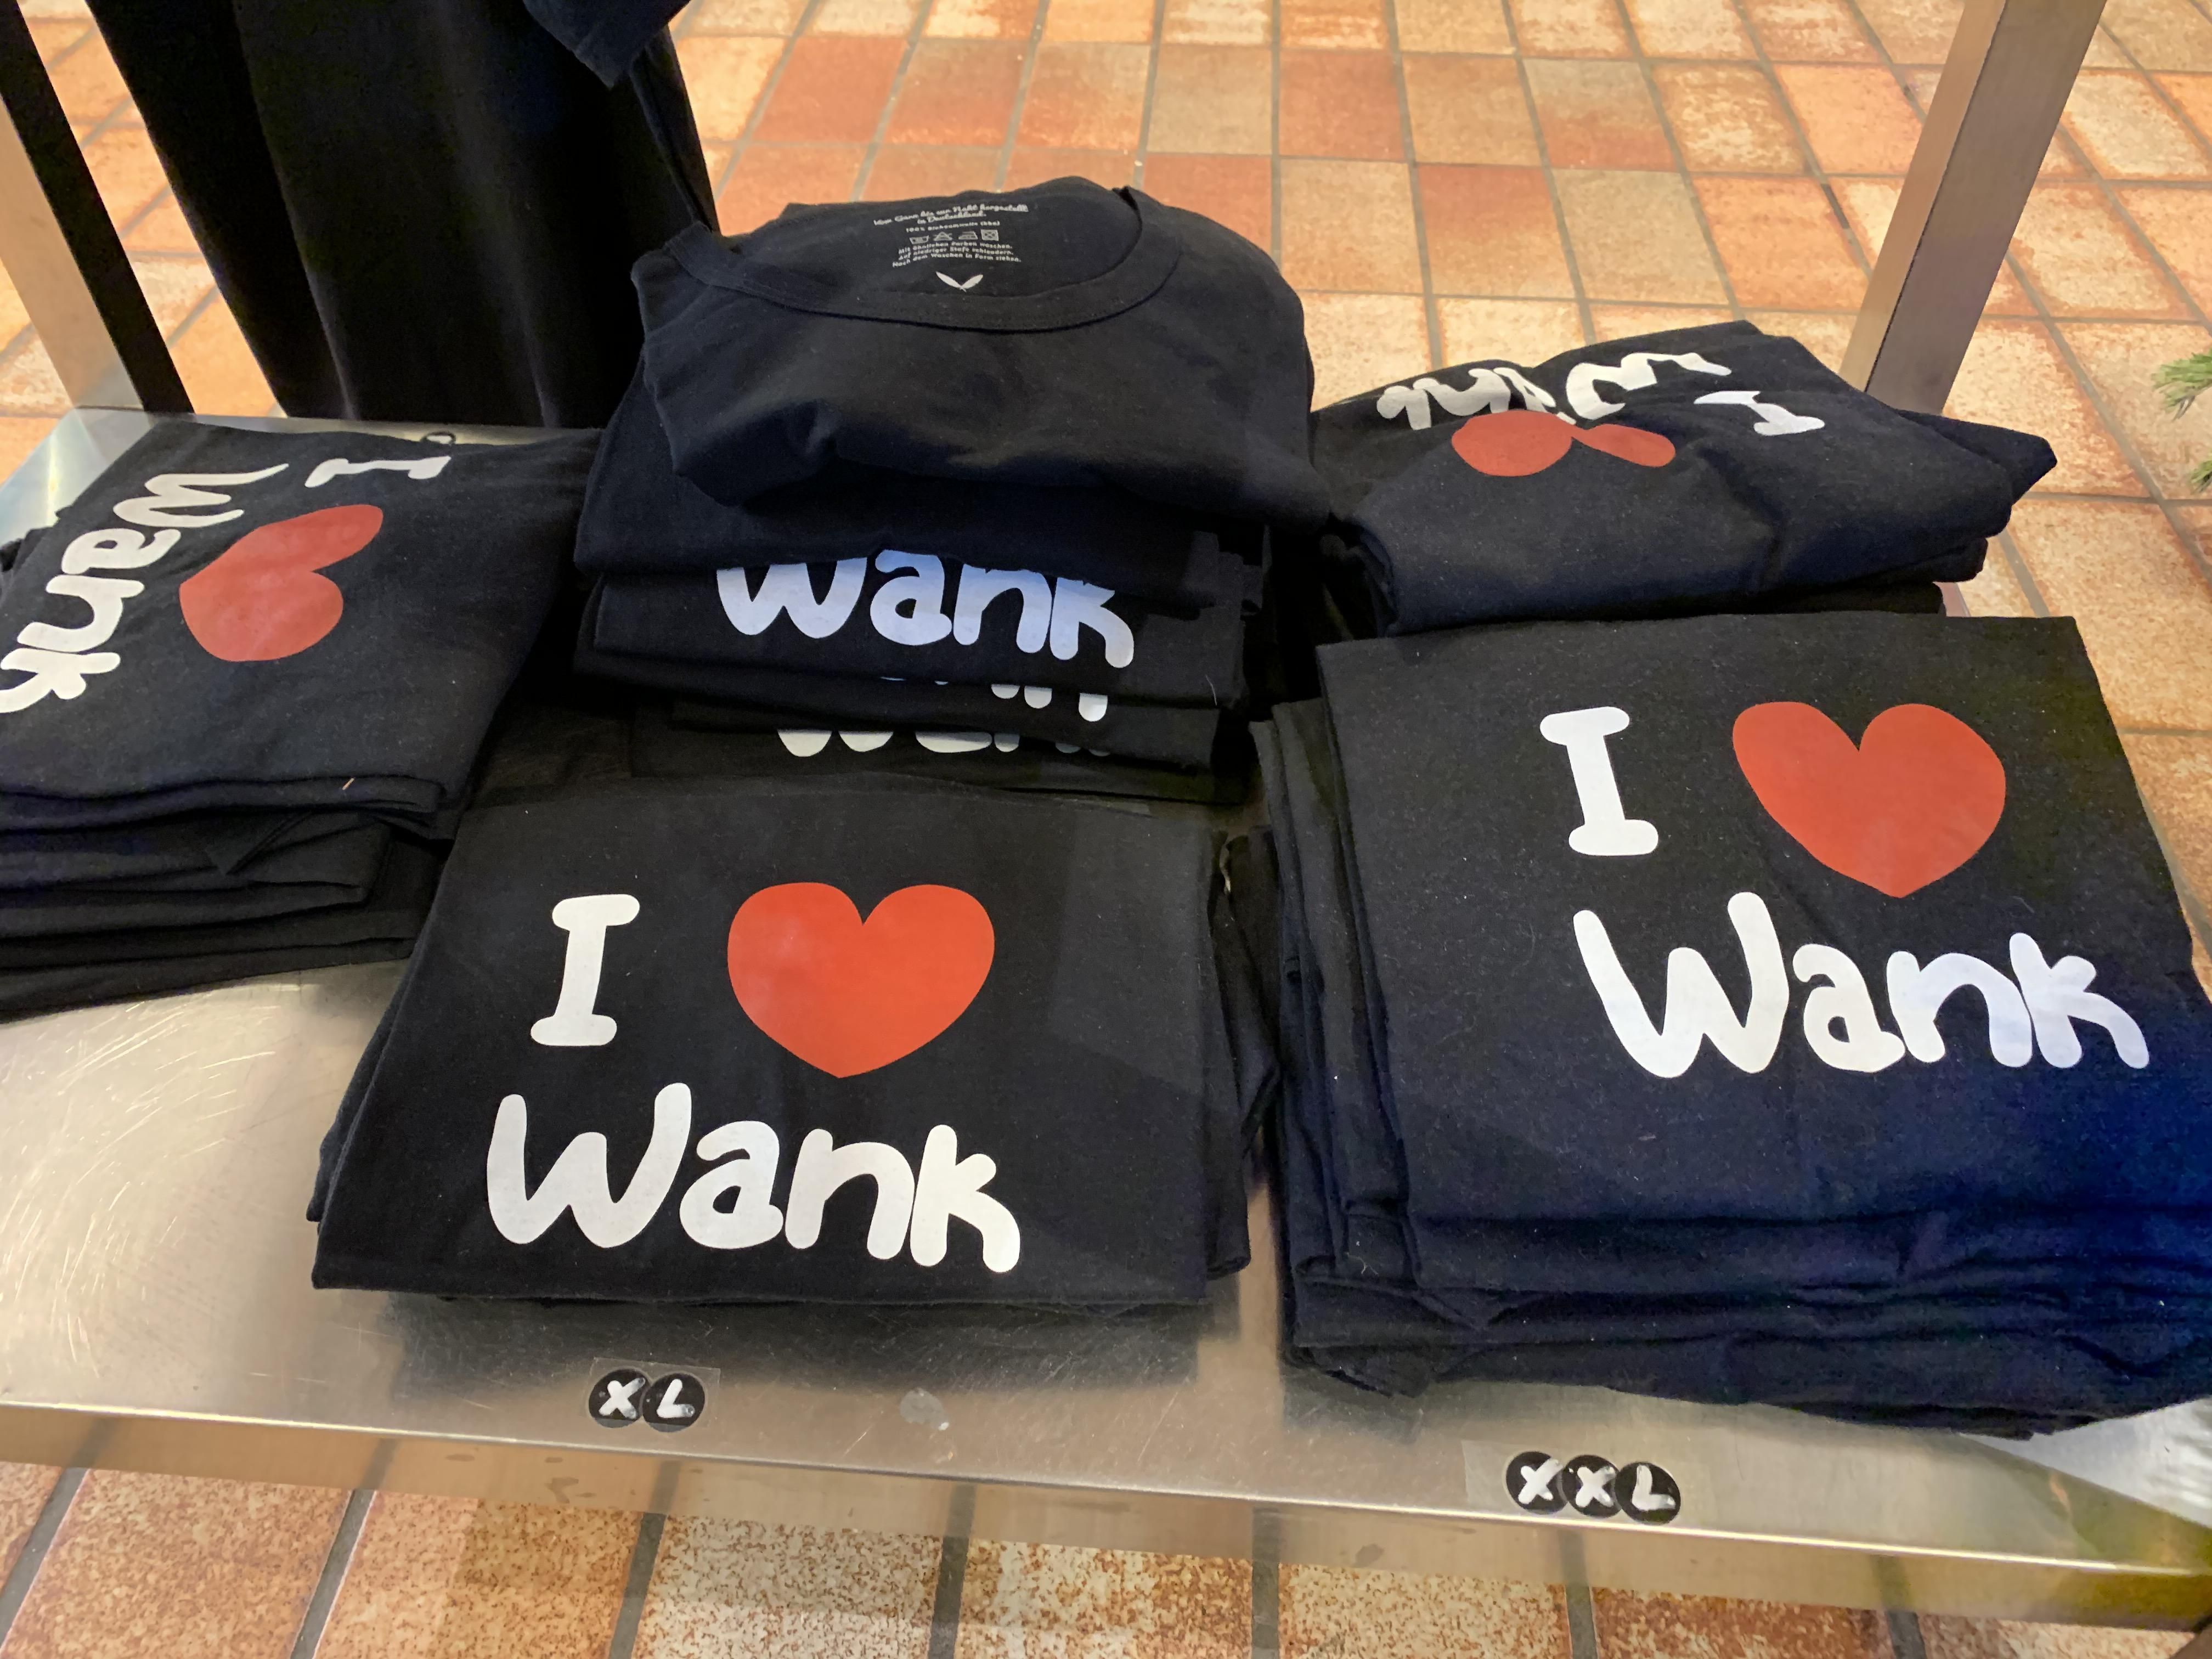 There is a mountain in Germany called Wank. They sell merchandise in the top. Guess it’s kinda popular with English speaking tourists!